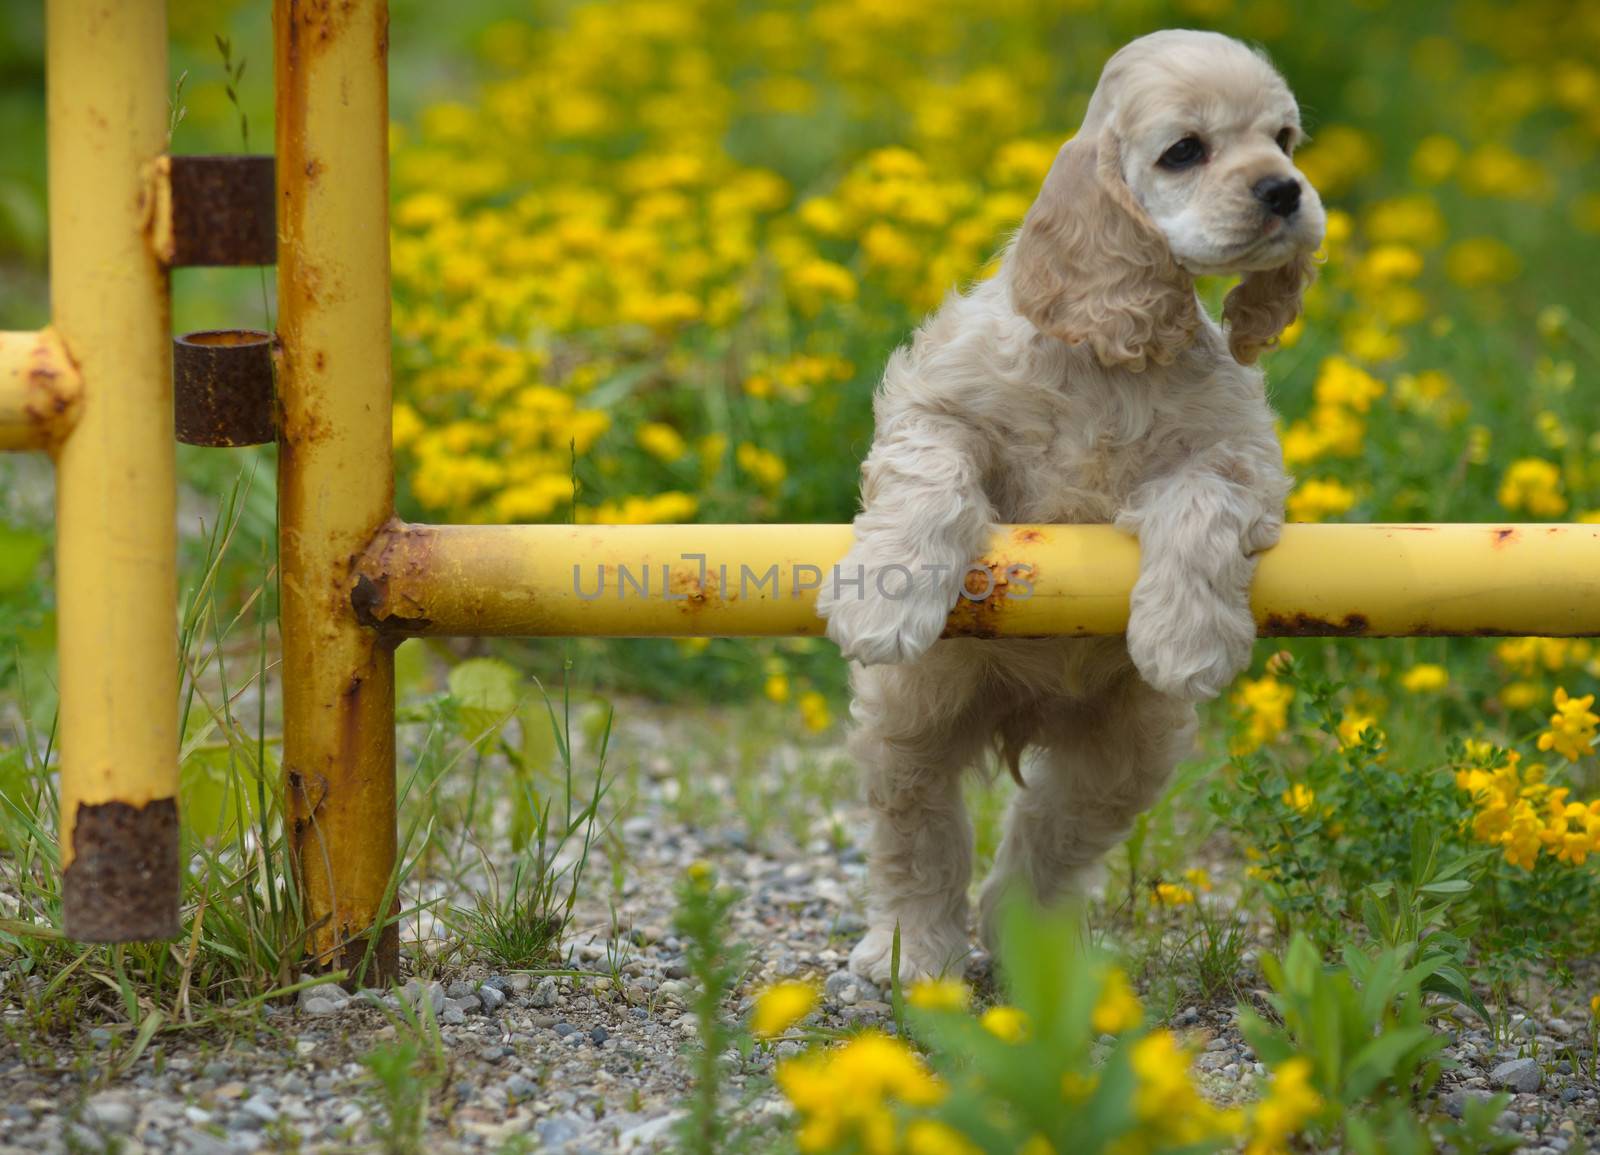 cute puppy - american cocker spaniel puppy with paws on metal fence